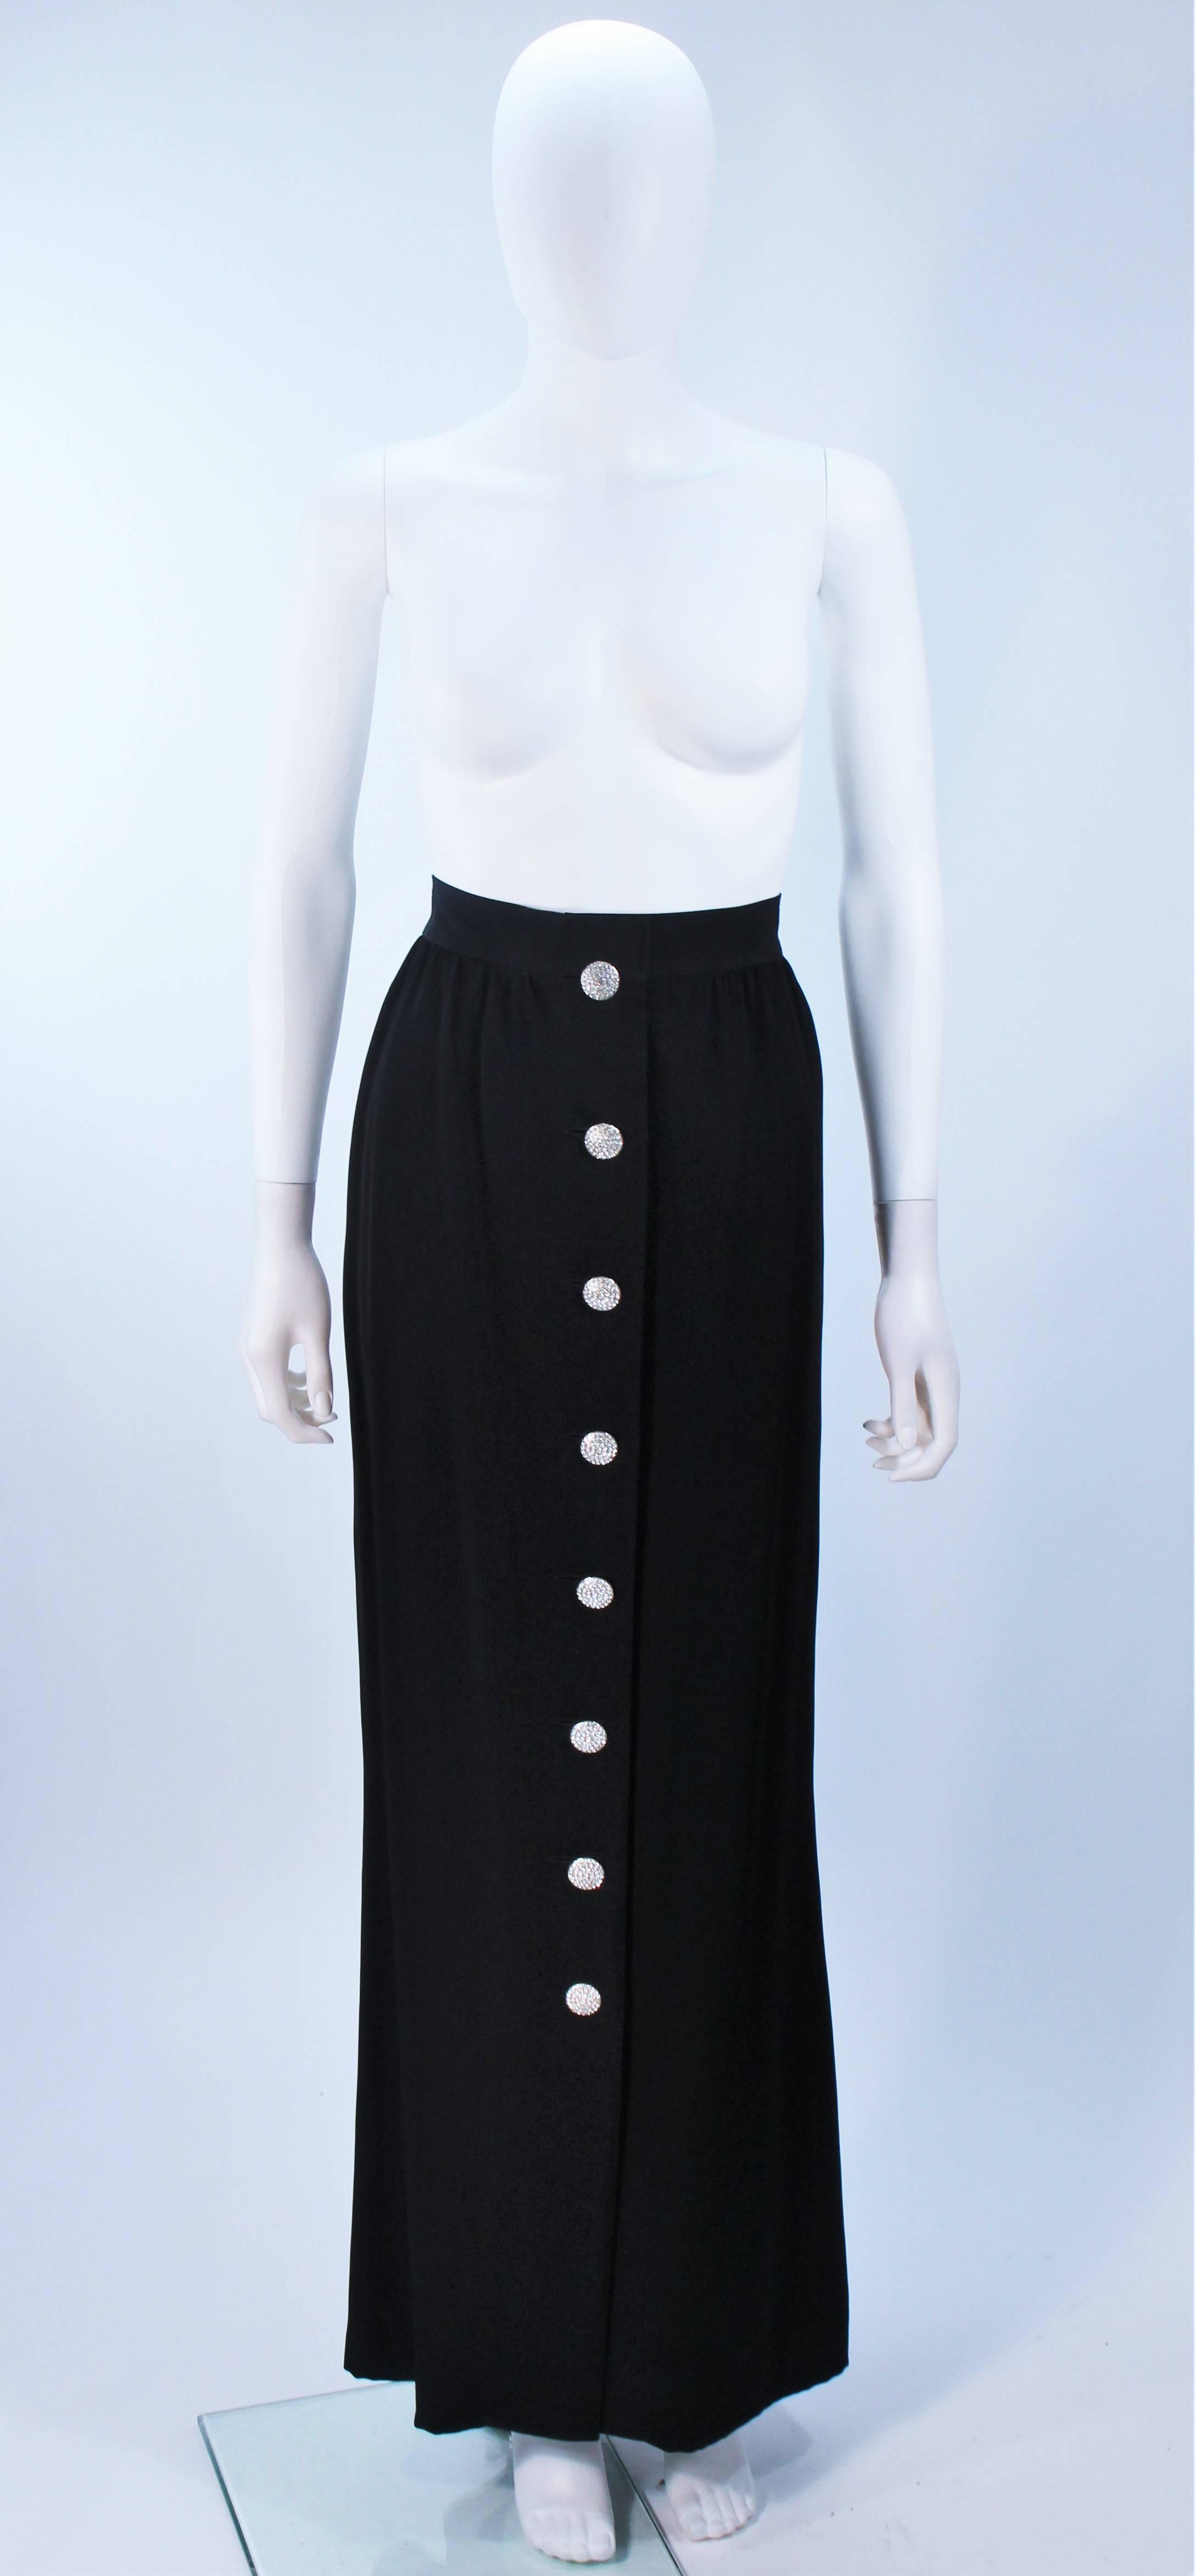  This Yves Saint Laurent skirt is composed of a black acetate blend. Features a center front rhinestone buttons, and side pockets. In excellent vintage condition, with original tags. 

This YSL evening skirt is from an extensive collection I